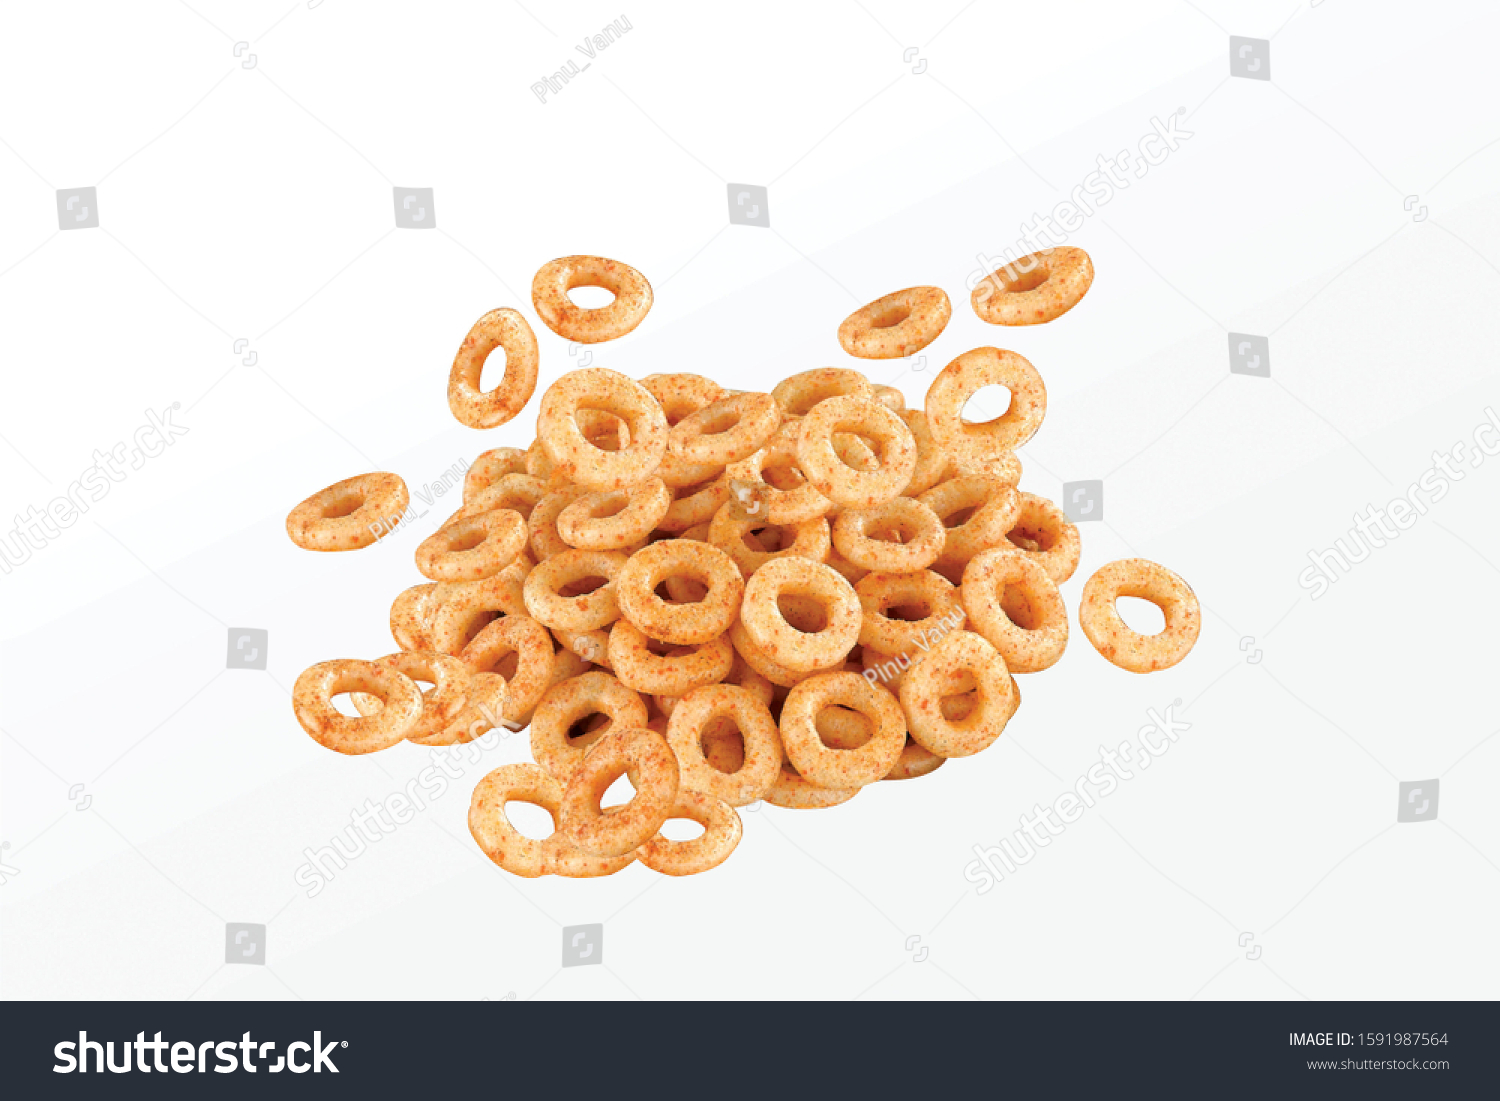 Fried and Spicy Mini Ring Snacks or Fryums (Snacks Pellets) Salty Corn Rings Snack, in a white background. selective focus - Image #1591987564